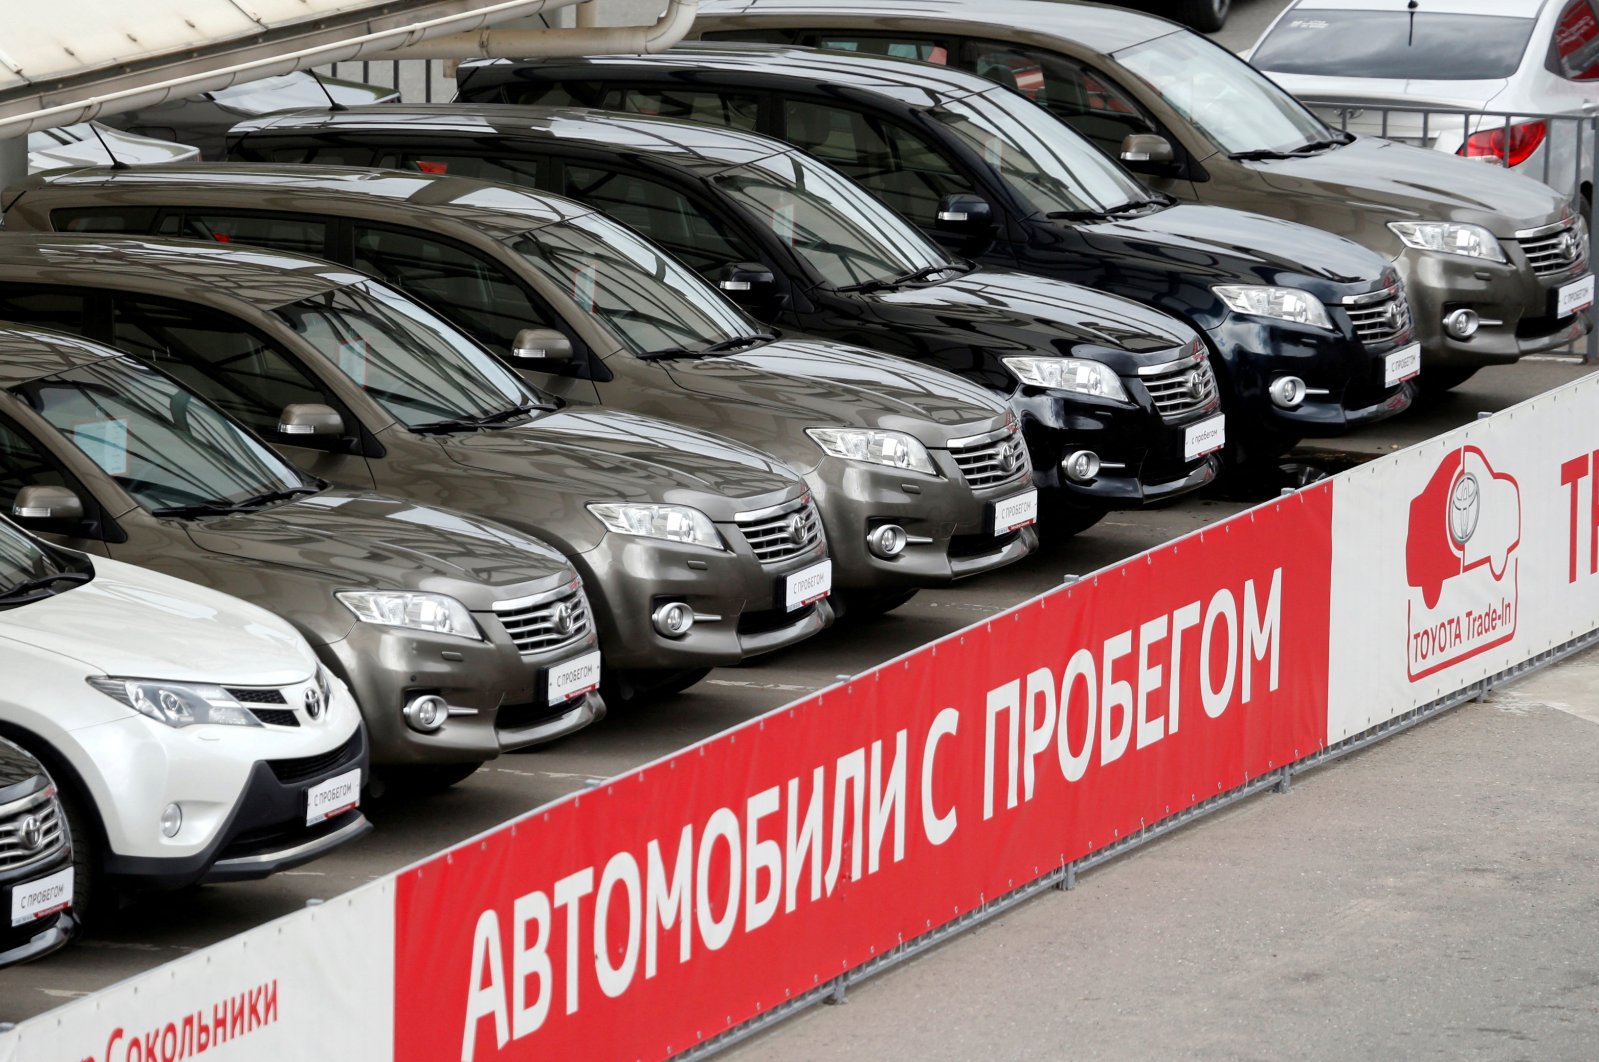 Second hand Toyota cars are seen on sale at a dealer shop in Moscow, Russia, July 8, 2016. (Reuters Photo)